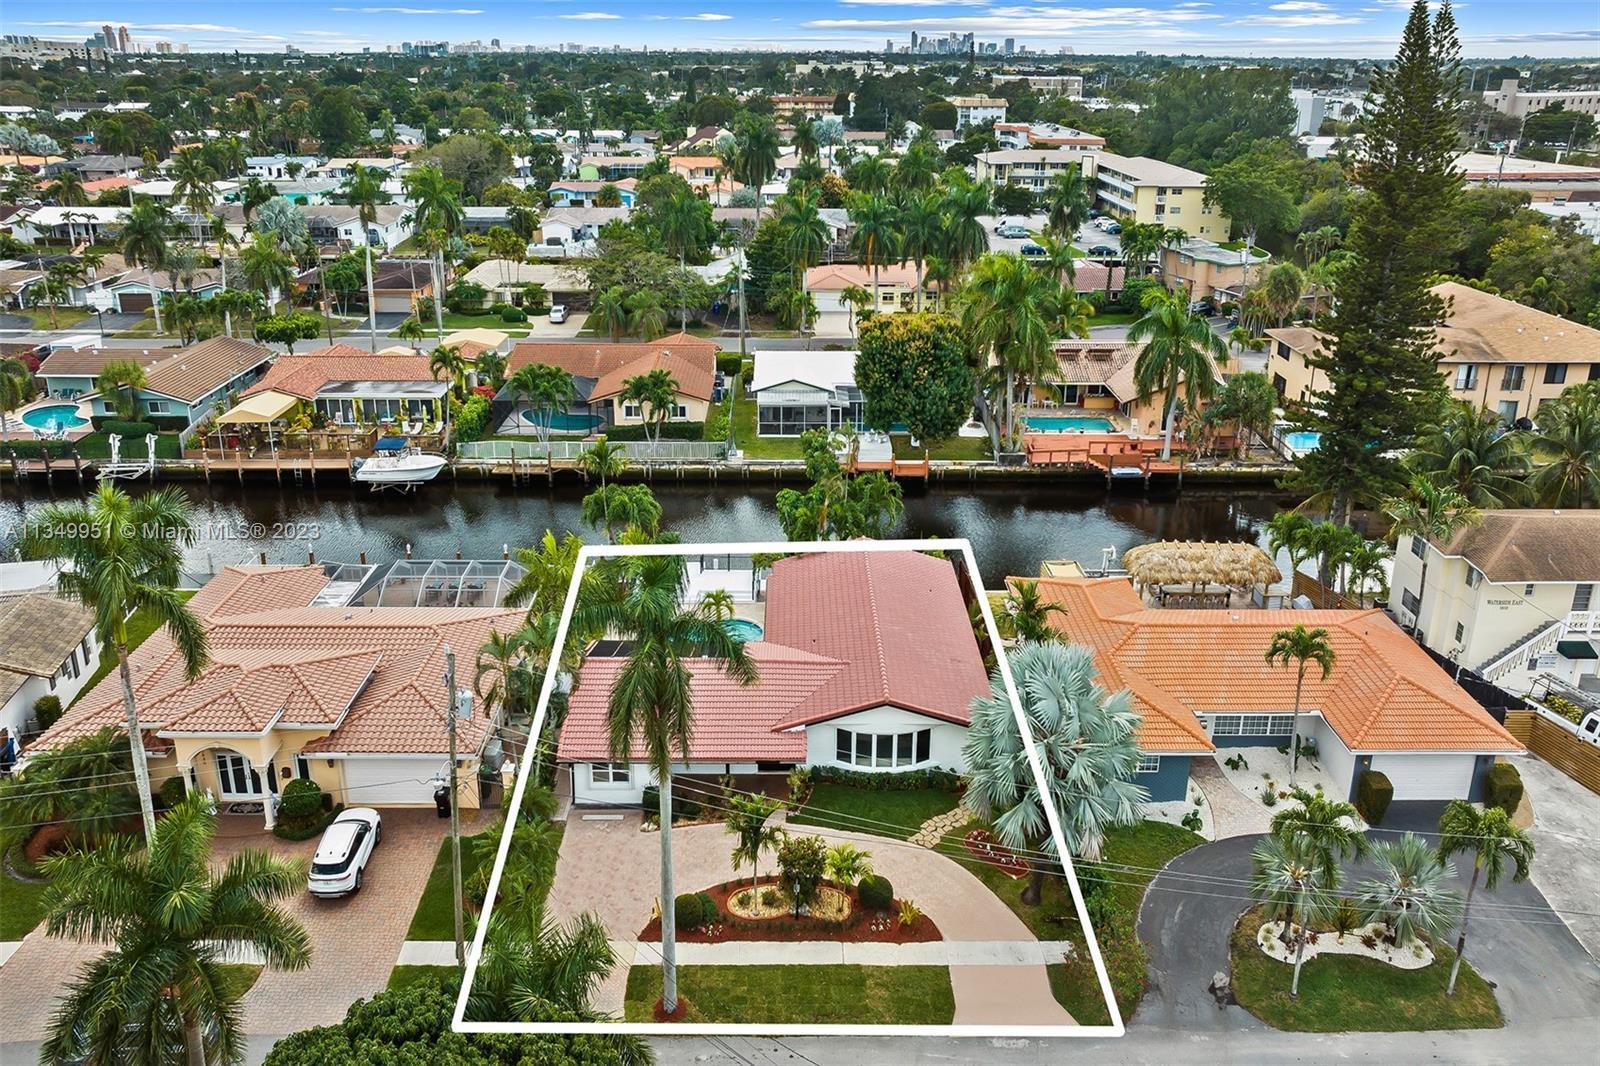 WATERFRONT PARADISE - RARELY AVAILABLE - AMAZING 4/3 WATERFRONT, OCEAN ACCESS HOME W/FABULOUS DOCK &